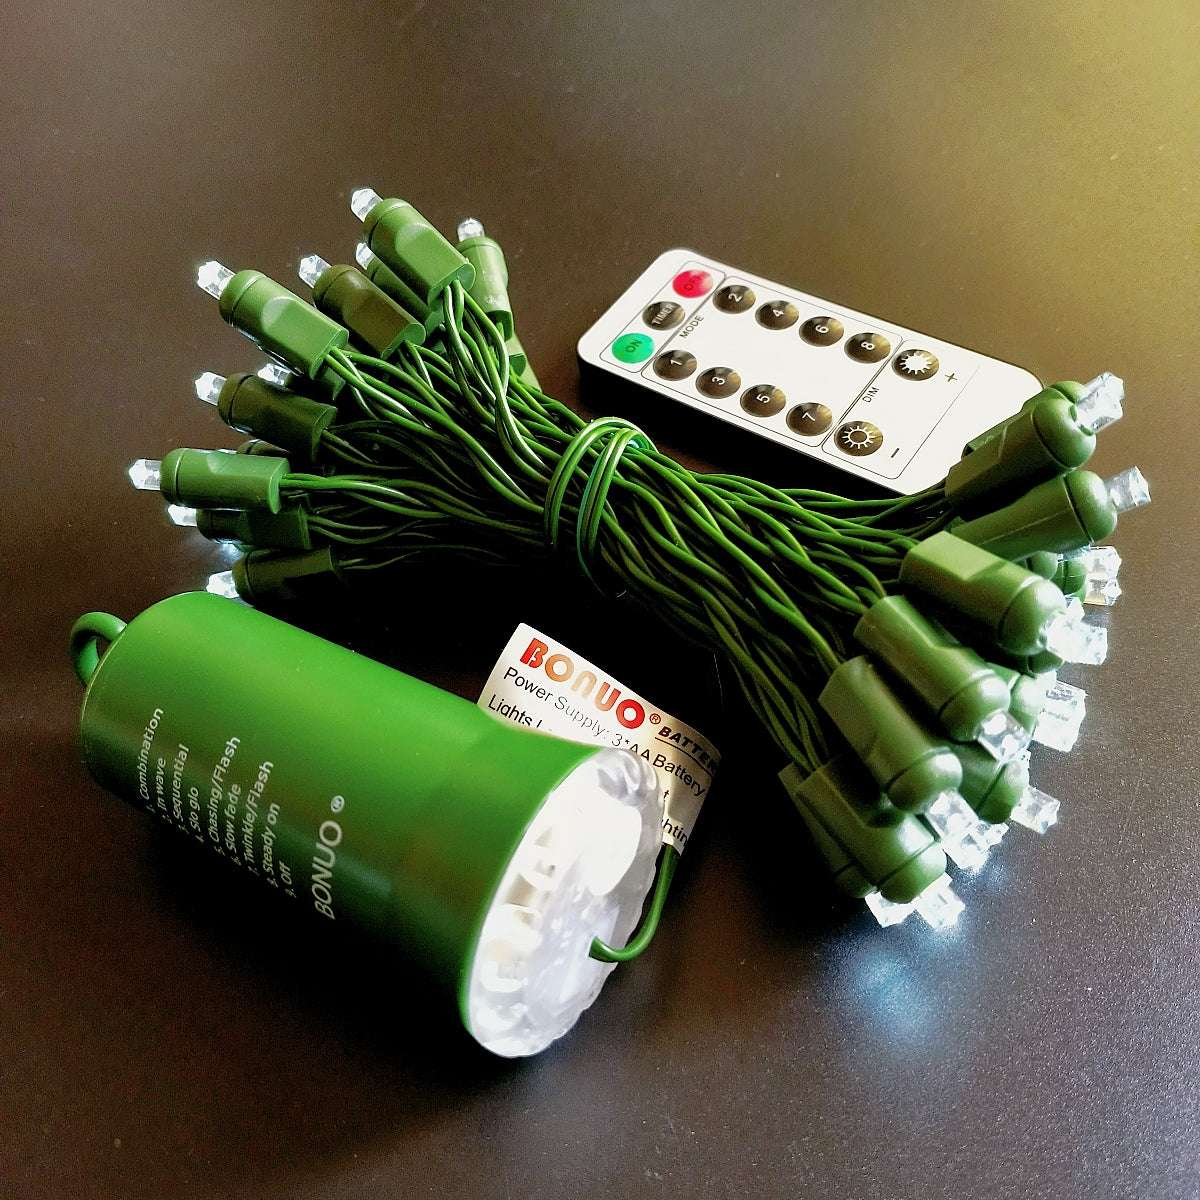 50 Bulbs White 5mm LED Christmas Lights Battery Operated with Remote Timer 8 Lighting Modes, Green Wire